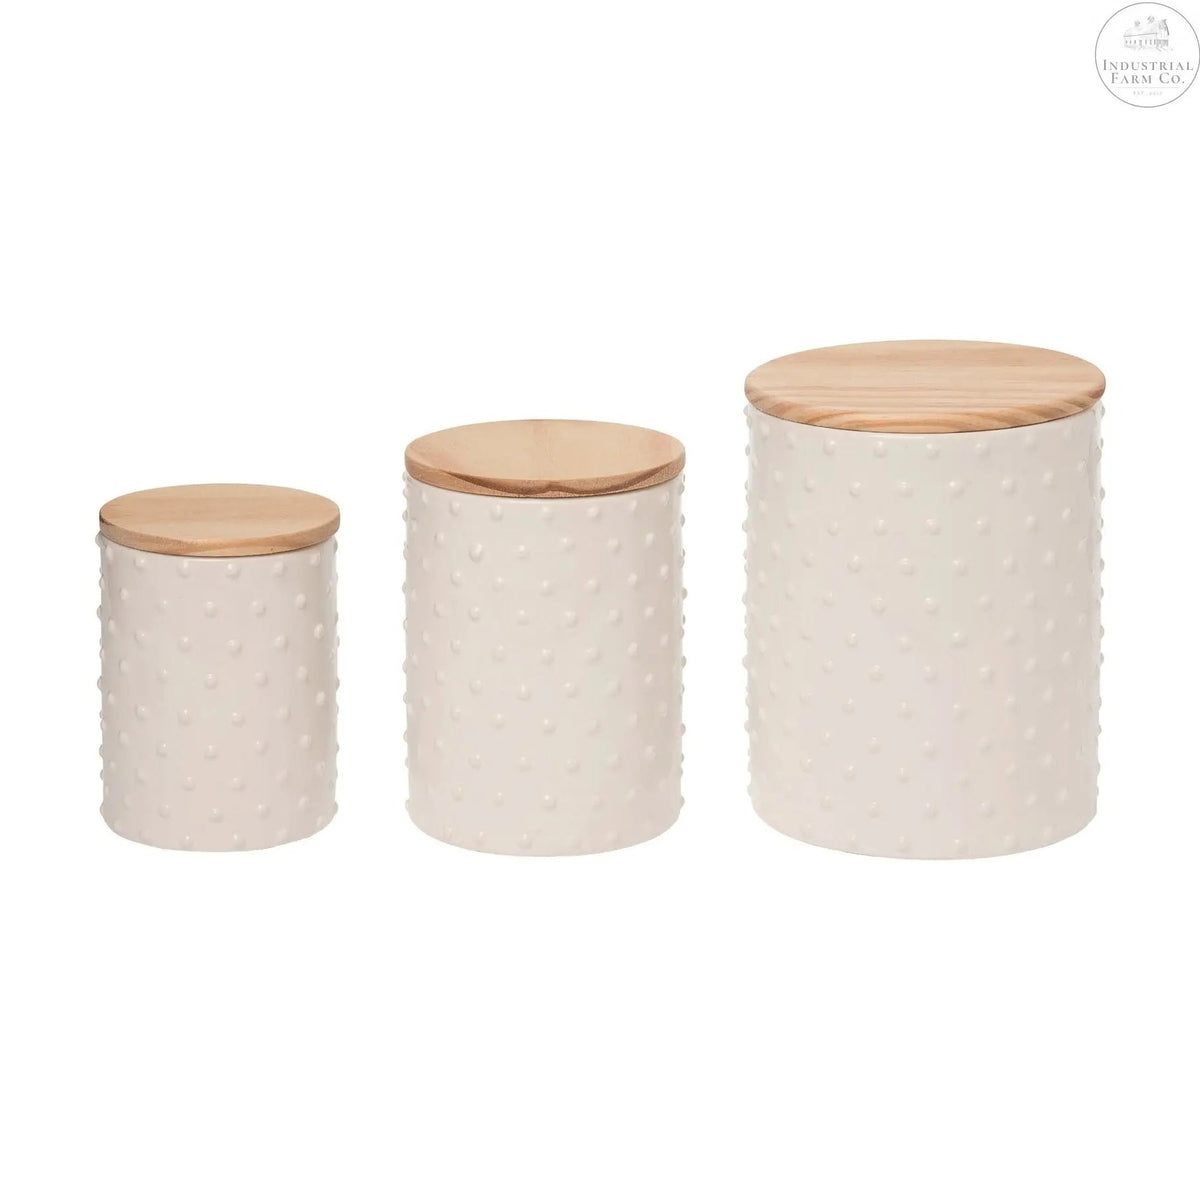 Ceramic Canisters (Set of 3)  Default Title   | Industrial Farm Co